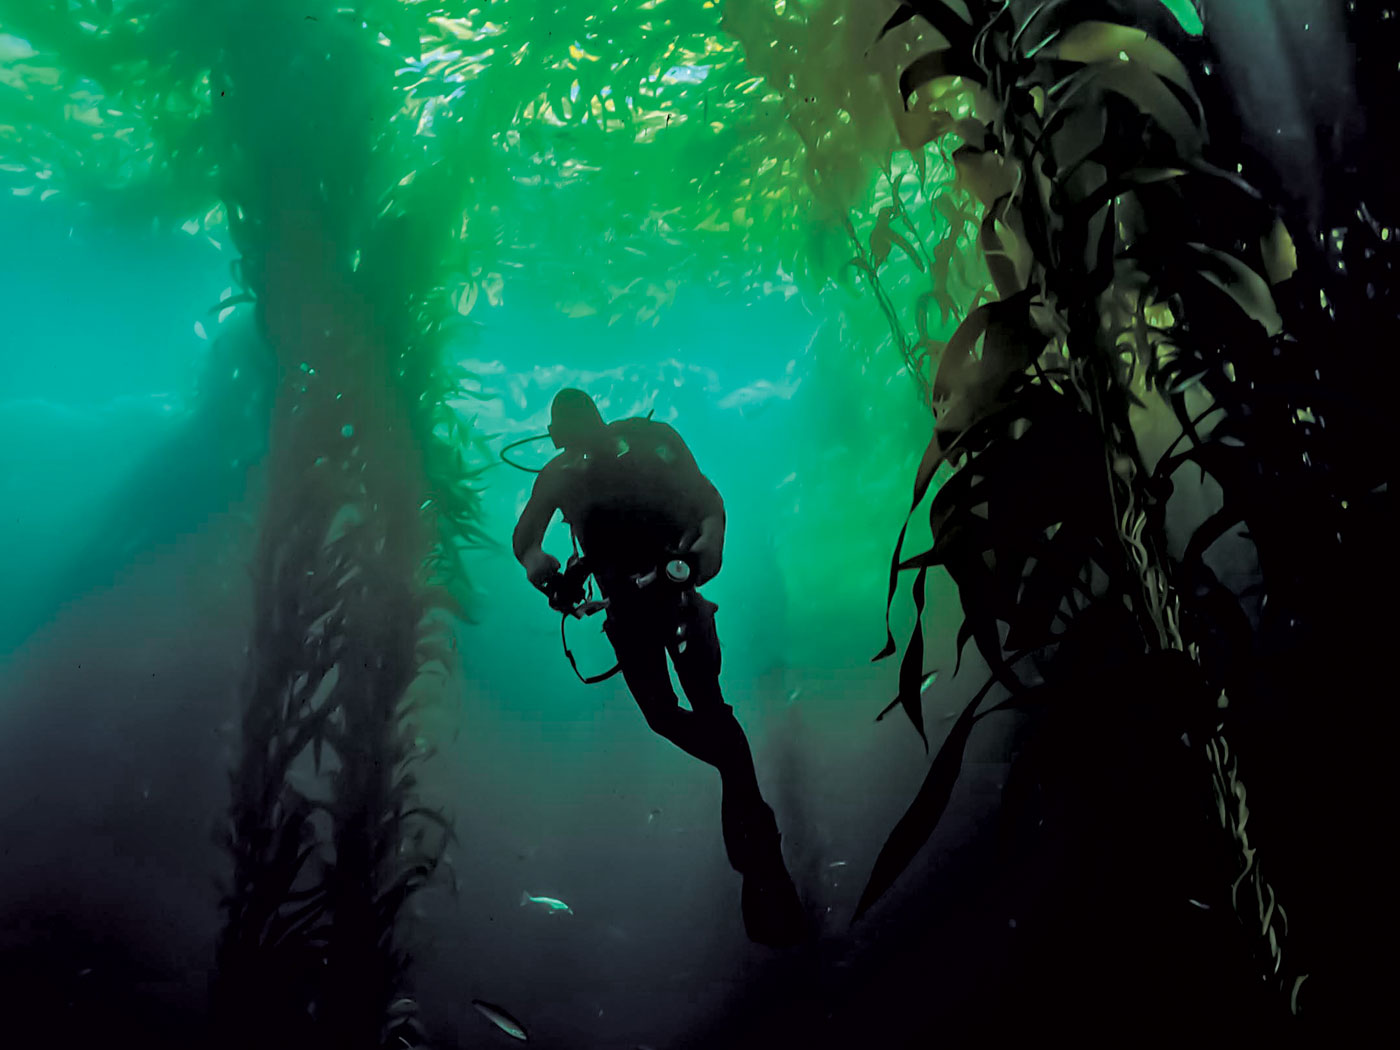 Forests of Giant Kelp